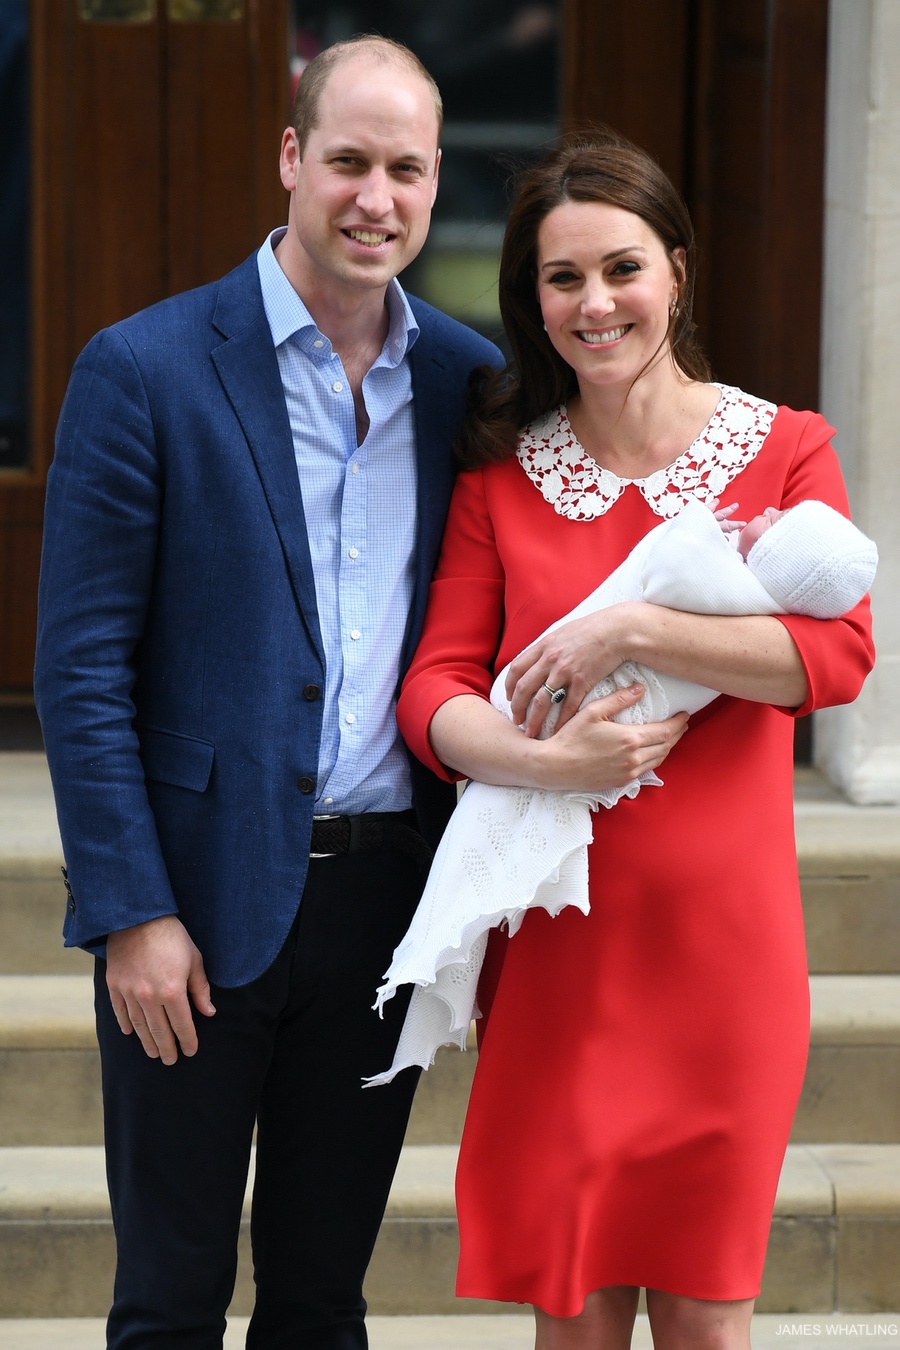 Kate Middleton and Prince William with their newborn baby boy